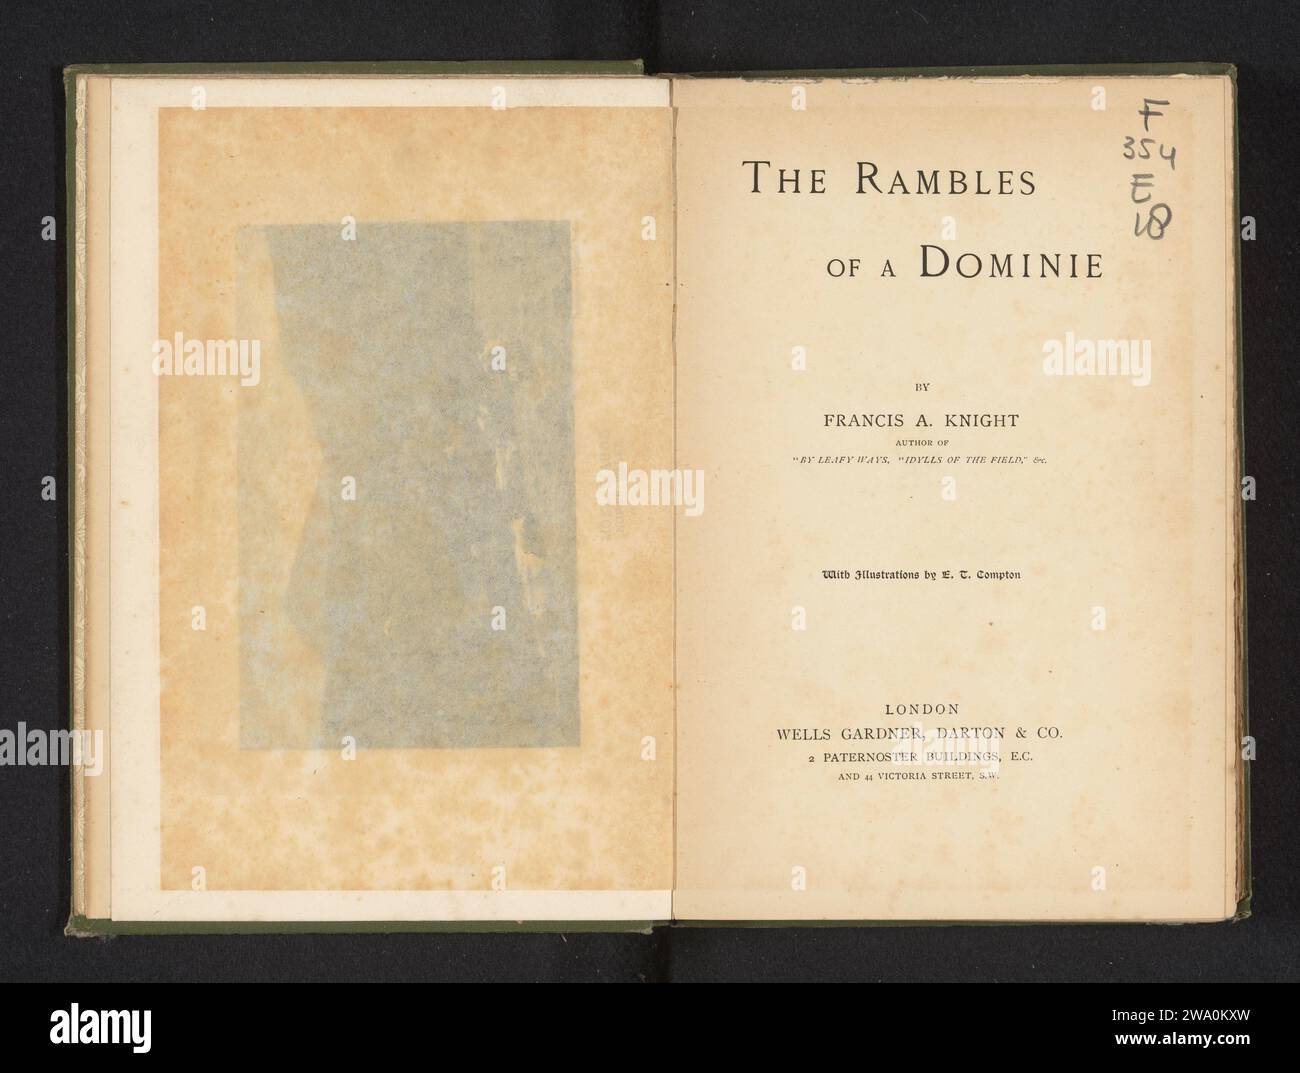 Rambles of a dominie, Francis A. Knight, 1891 book  London paper. cardboard. linen (material) printing Stock Photo